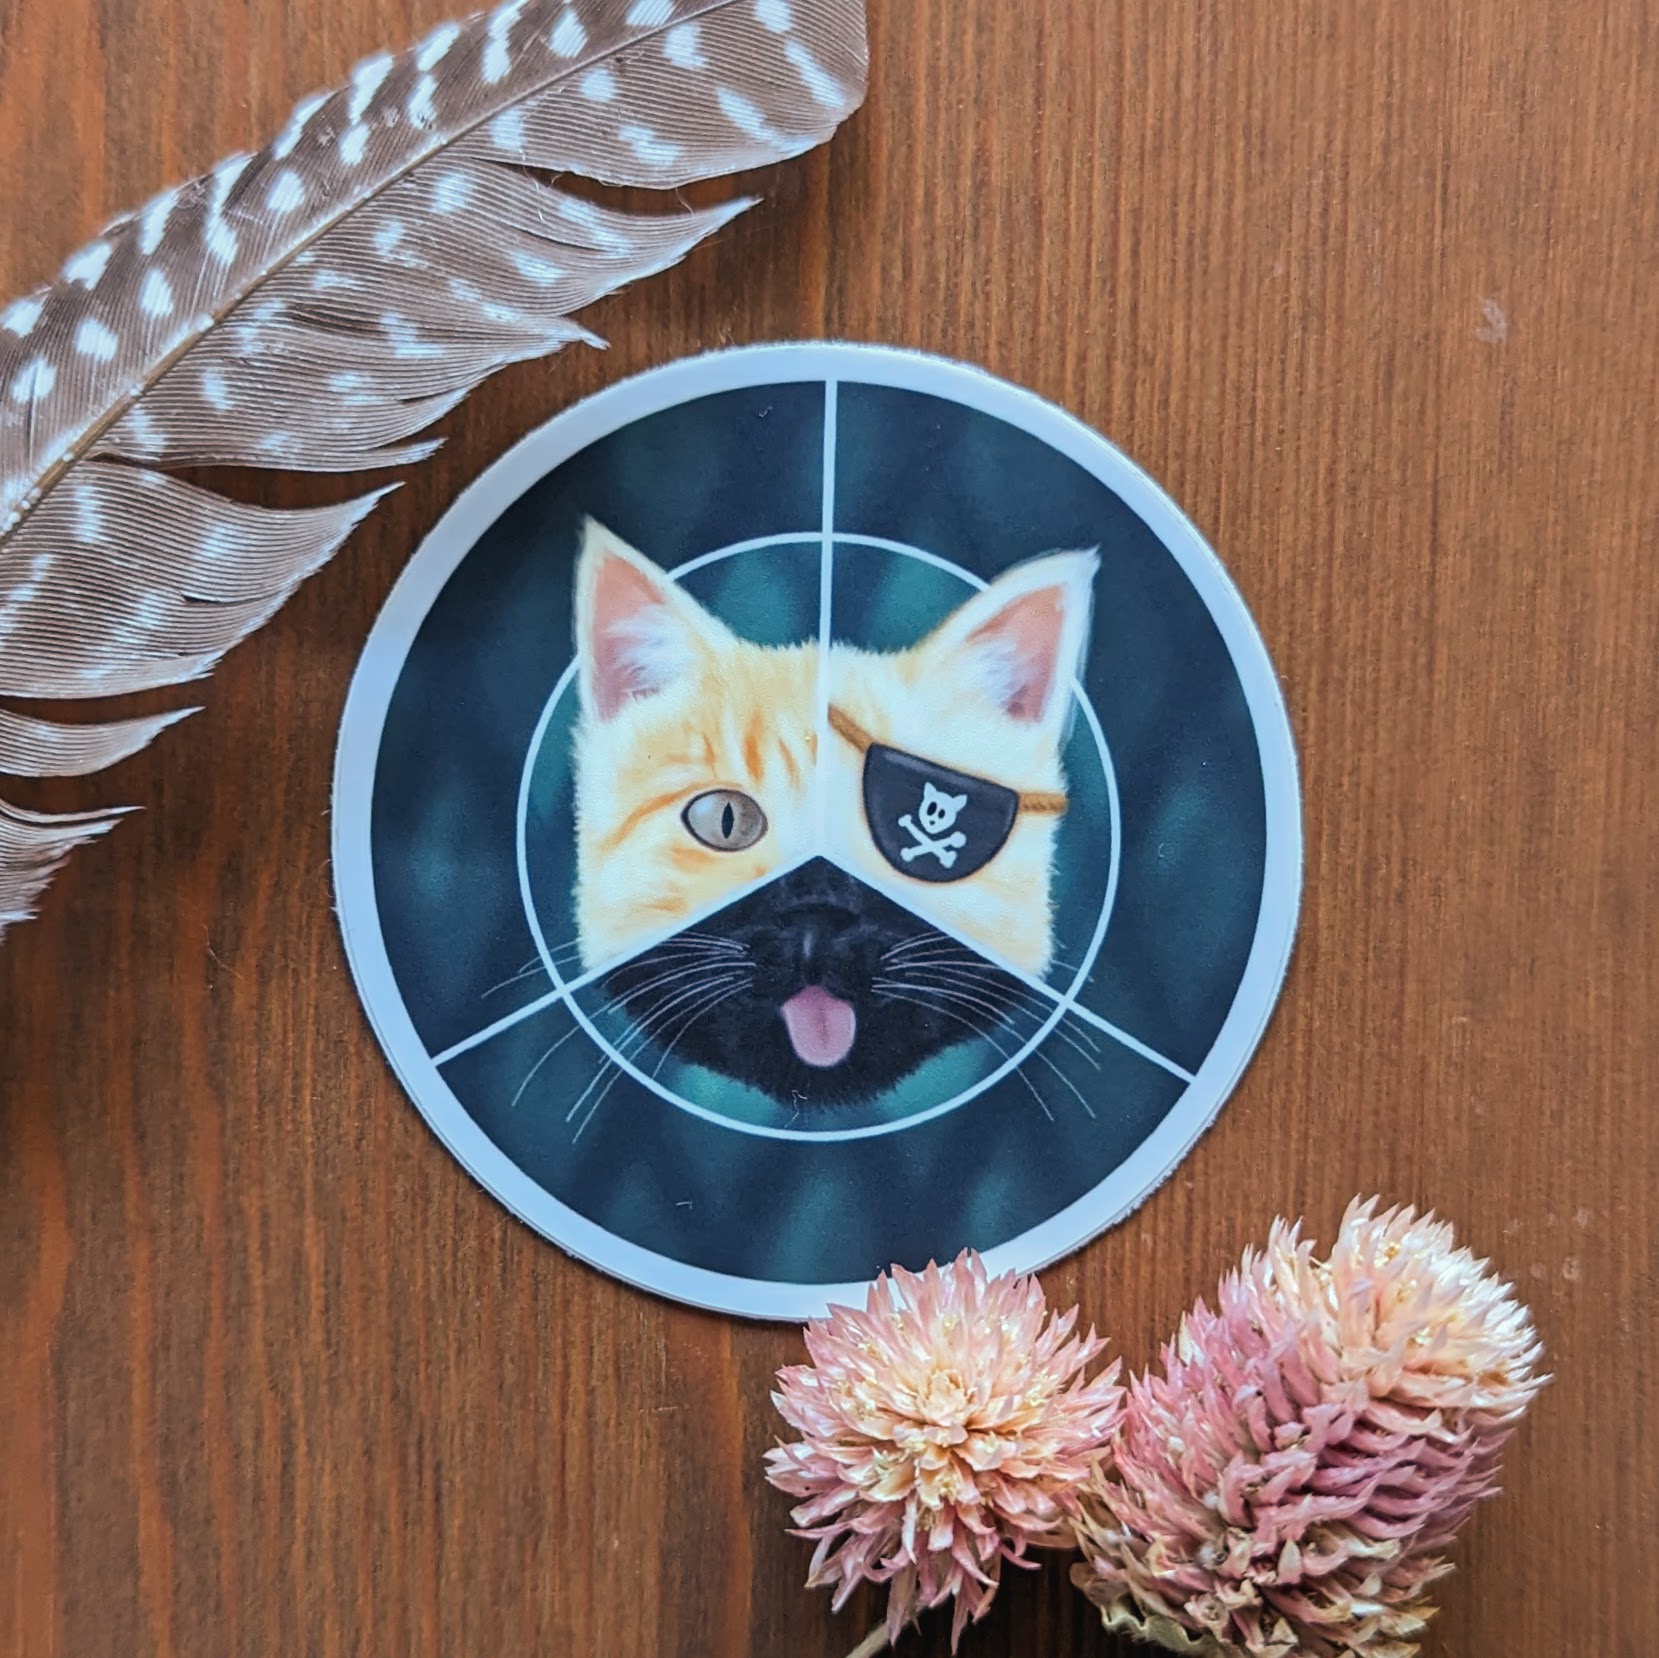 a round sticker with a logo of a cats face composed of three thirds of cat faces including a blind ginger cat with a pirate eye cover, a black blind cat, and a one-eyed ginger cat